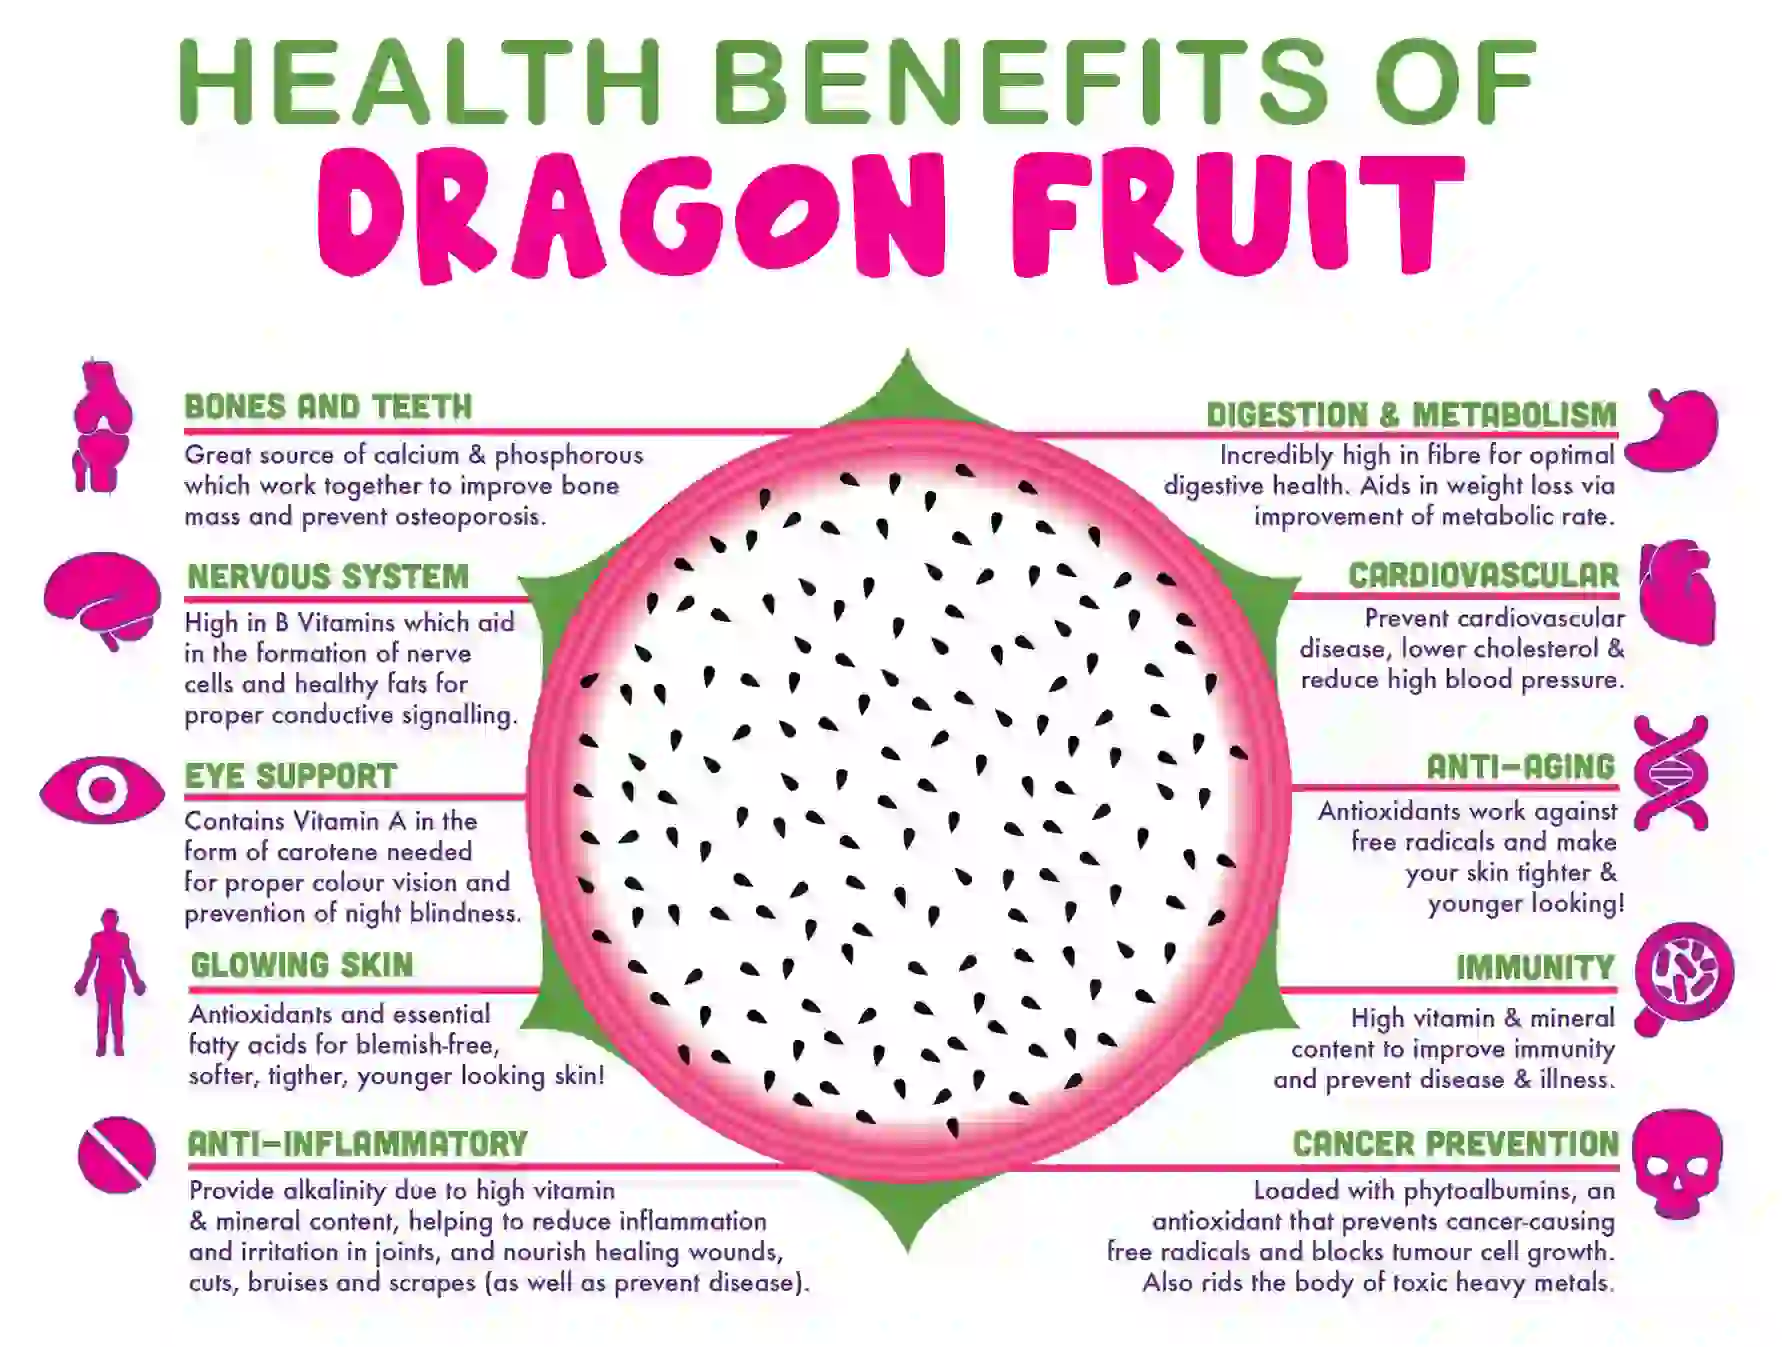 Dragon-fruit-also-known-as-pitaya-or-pitahaya-is-a-tropical-fruit-high-in-antioxidants-vitamin-C-and-fiber.